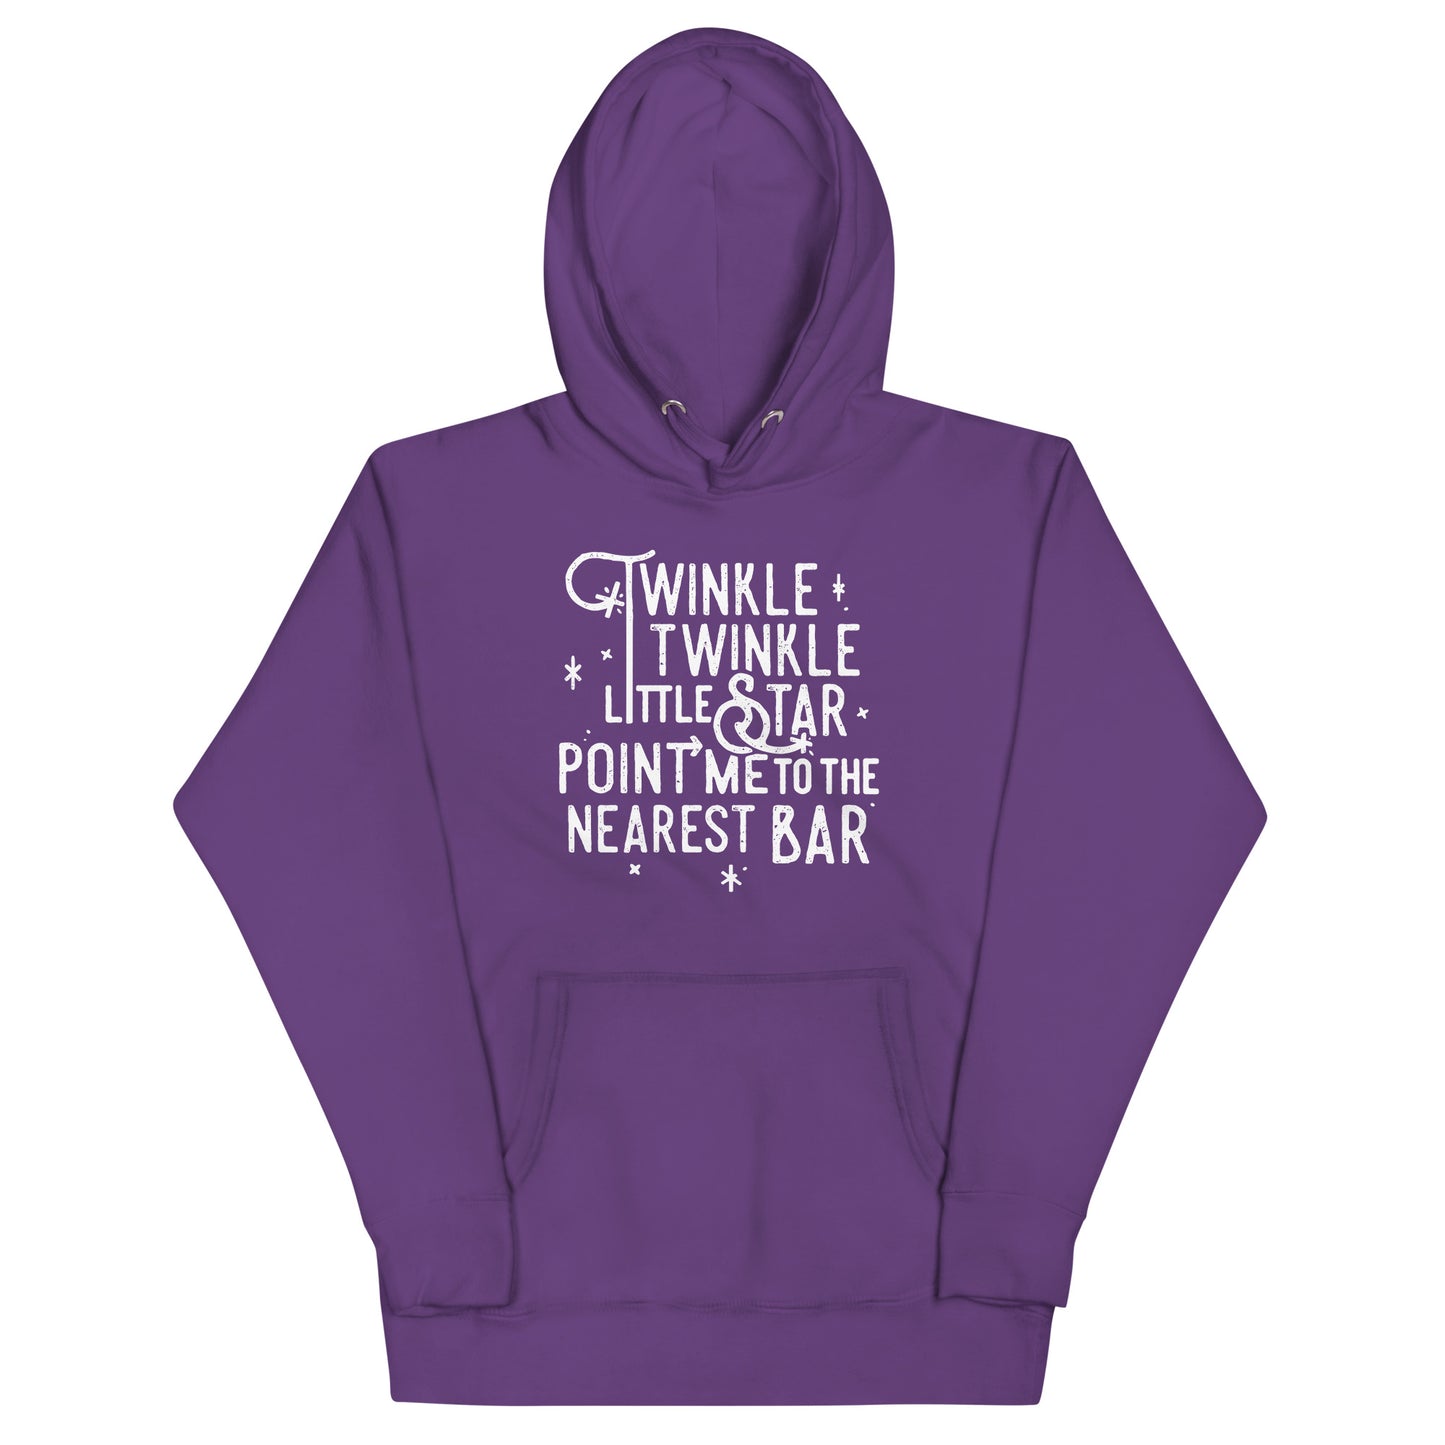 Point Me To The Nearest Bar Unisex Hoodie